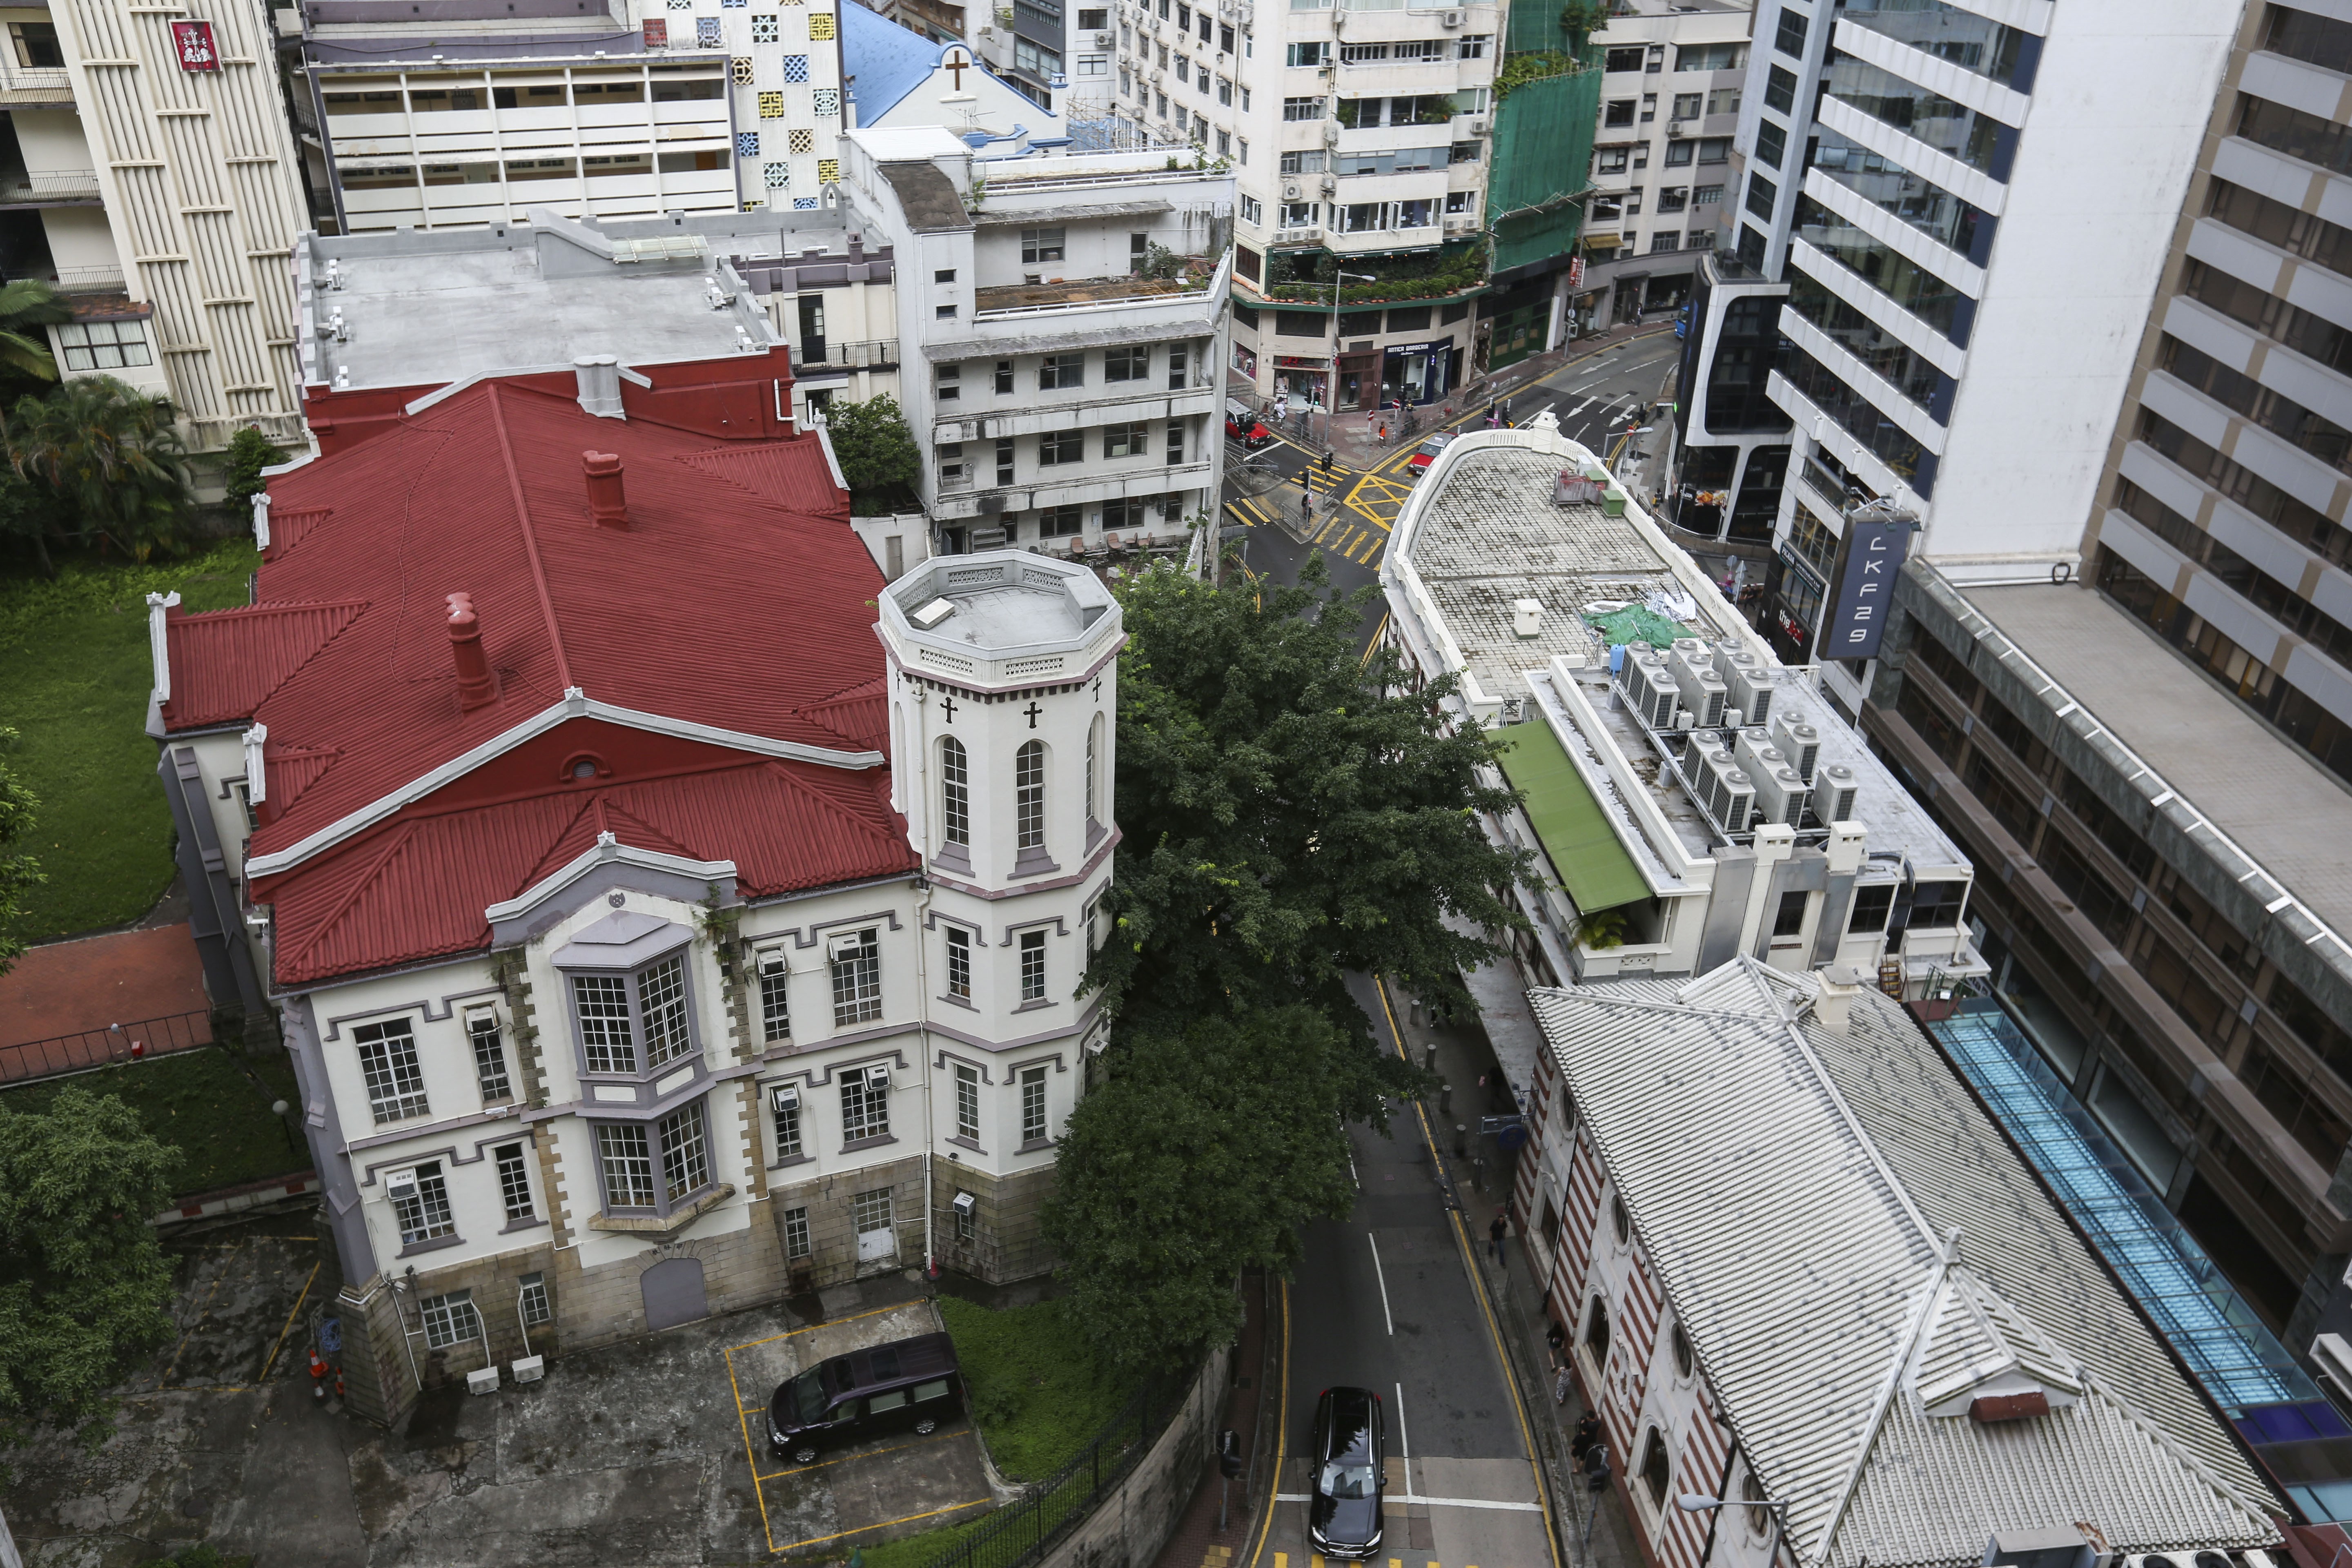 Hong Kong’s Anglican church proposed to build a 25-storey hospital building in the compound that includes Bishop’s House (left), listed as a grade one building by the Antiquities Advisory Board, on 1 Lower Albert Road, Central. Photo: Xiaomei Chen